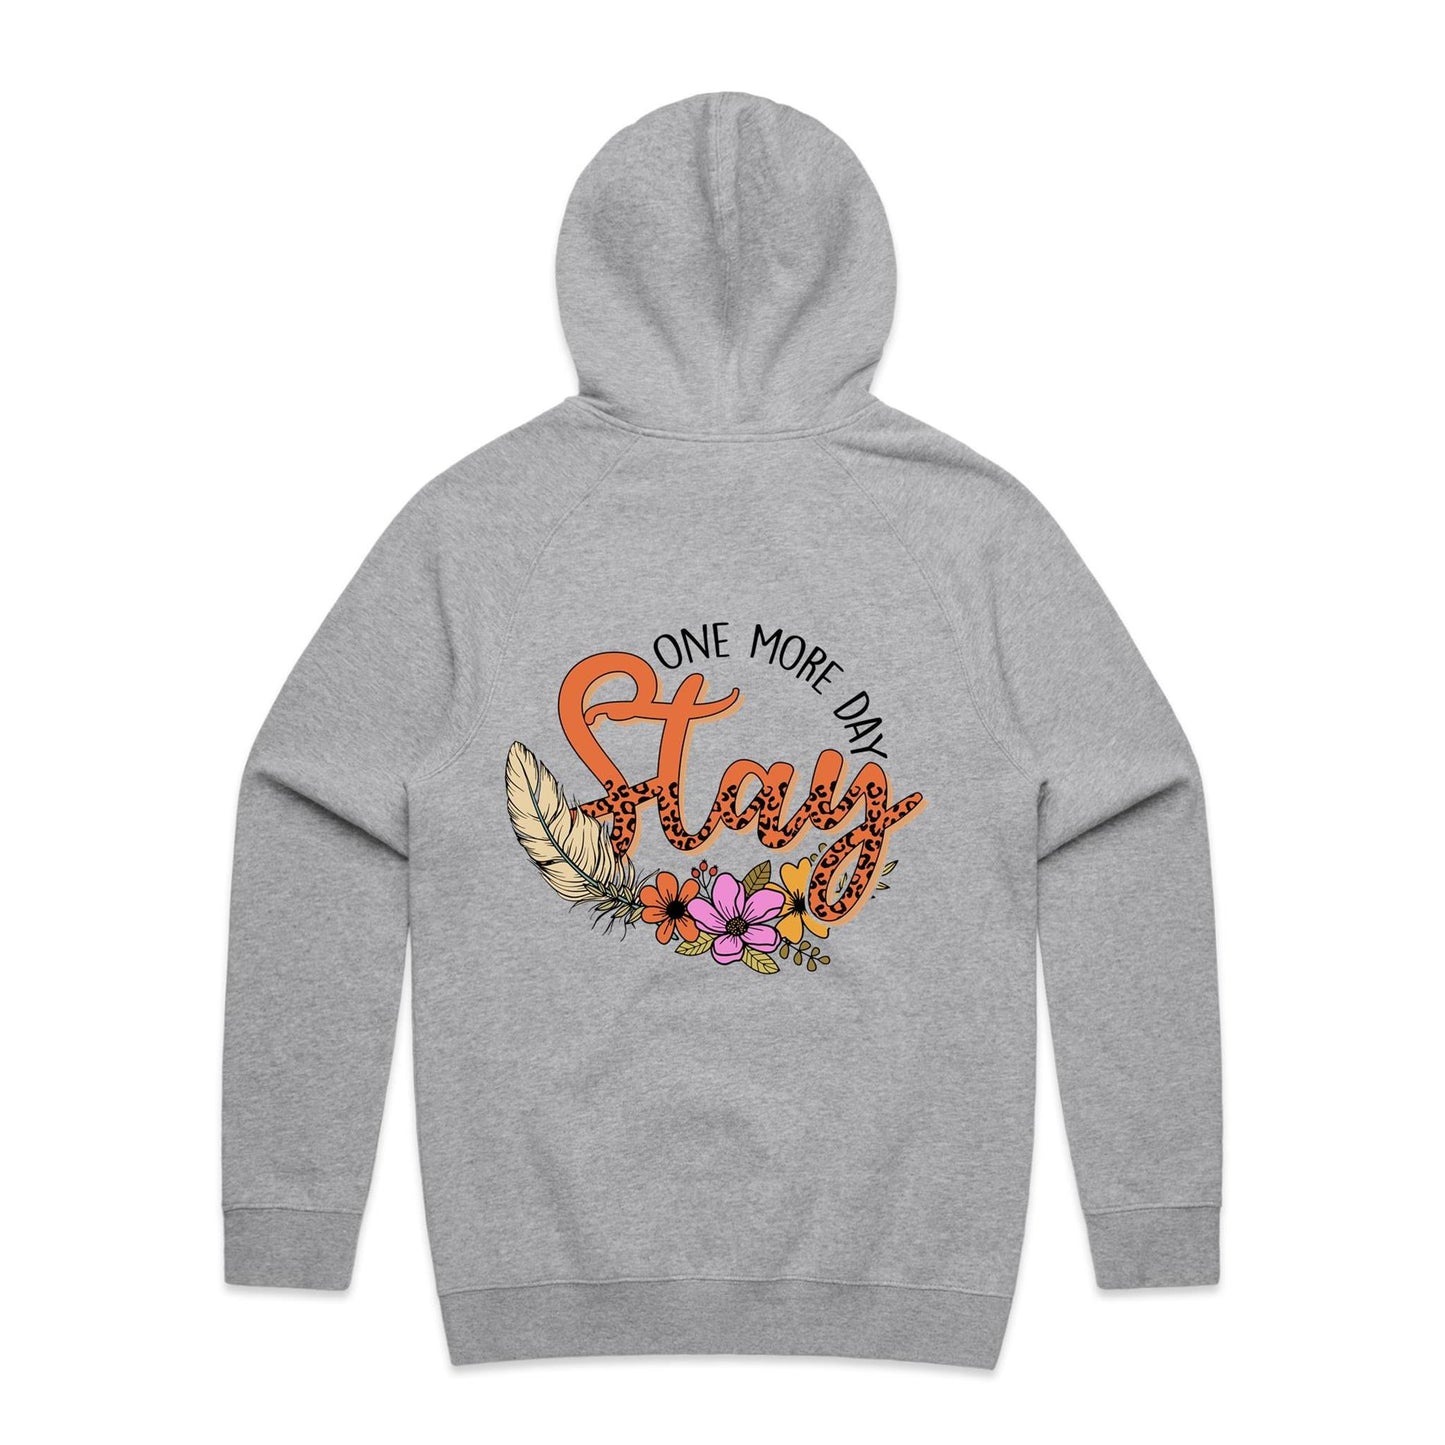 Unisex Hoodie - Stay One More Day (Back)